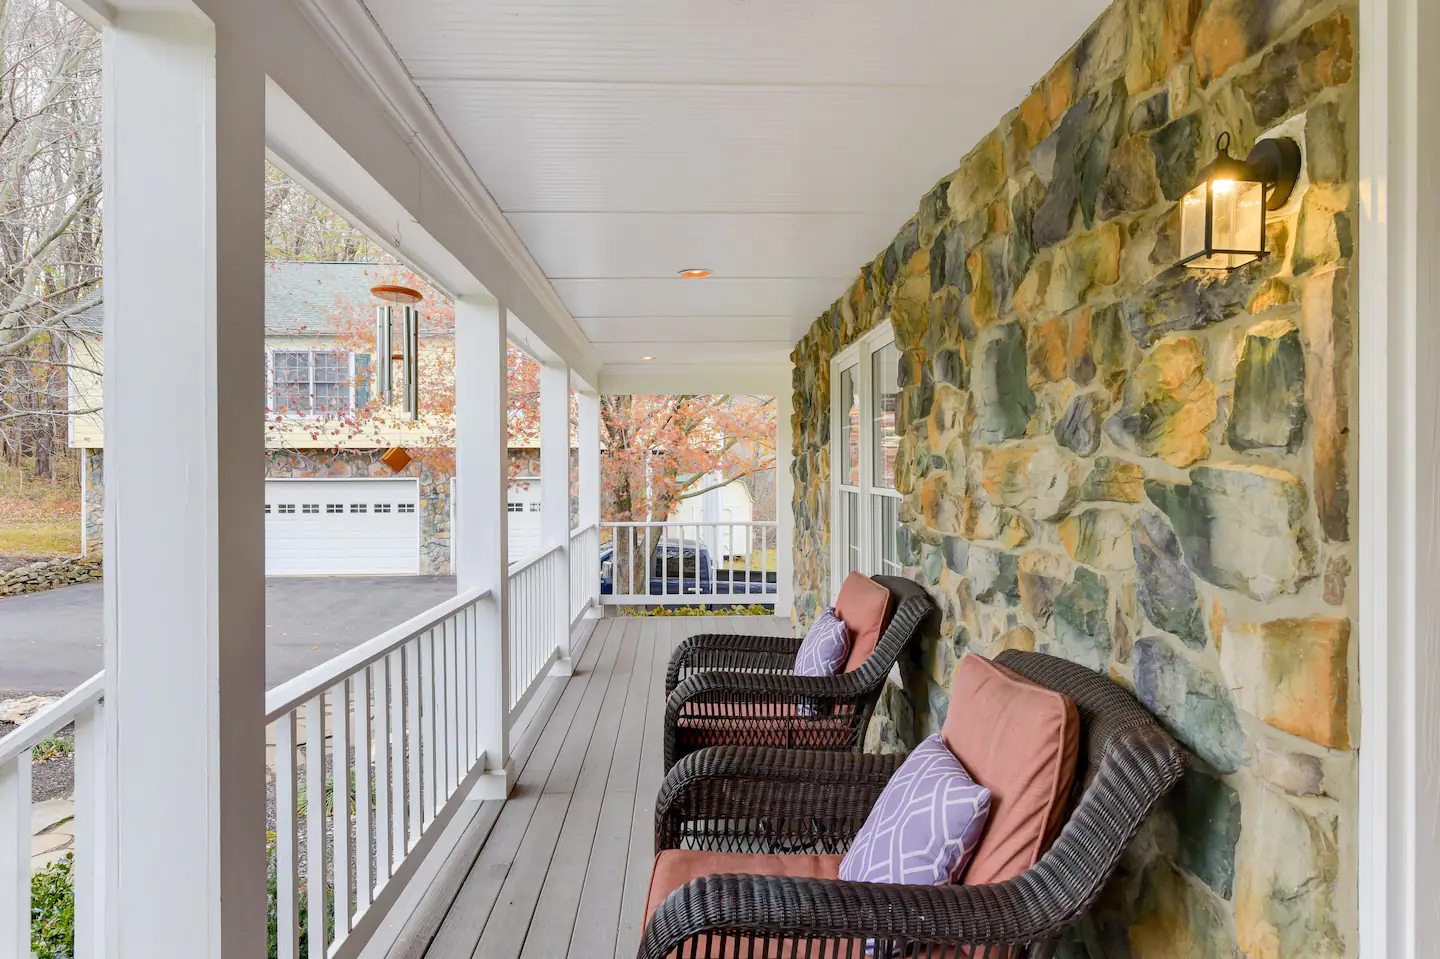 The front porch is perfect if you want a relaxing moment.